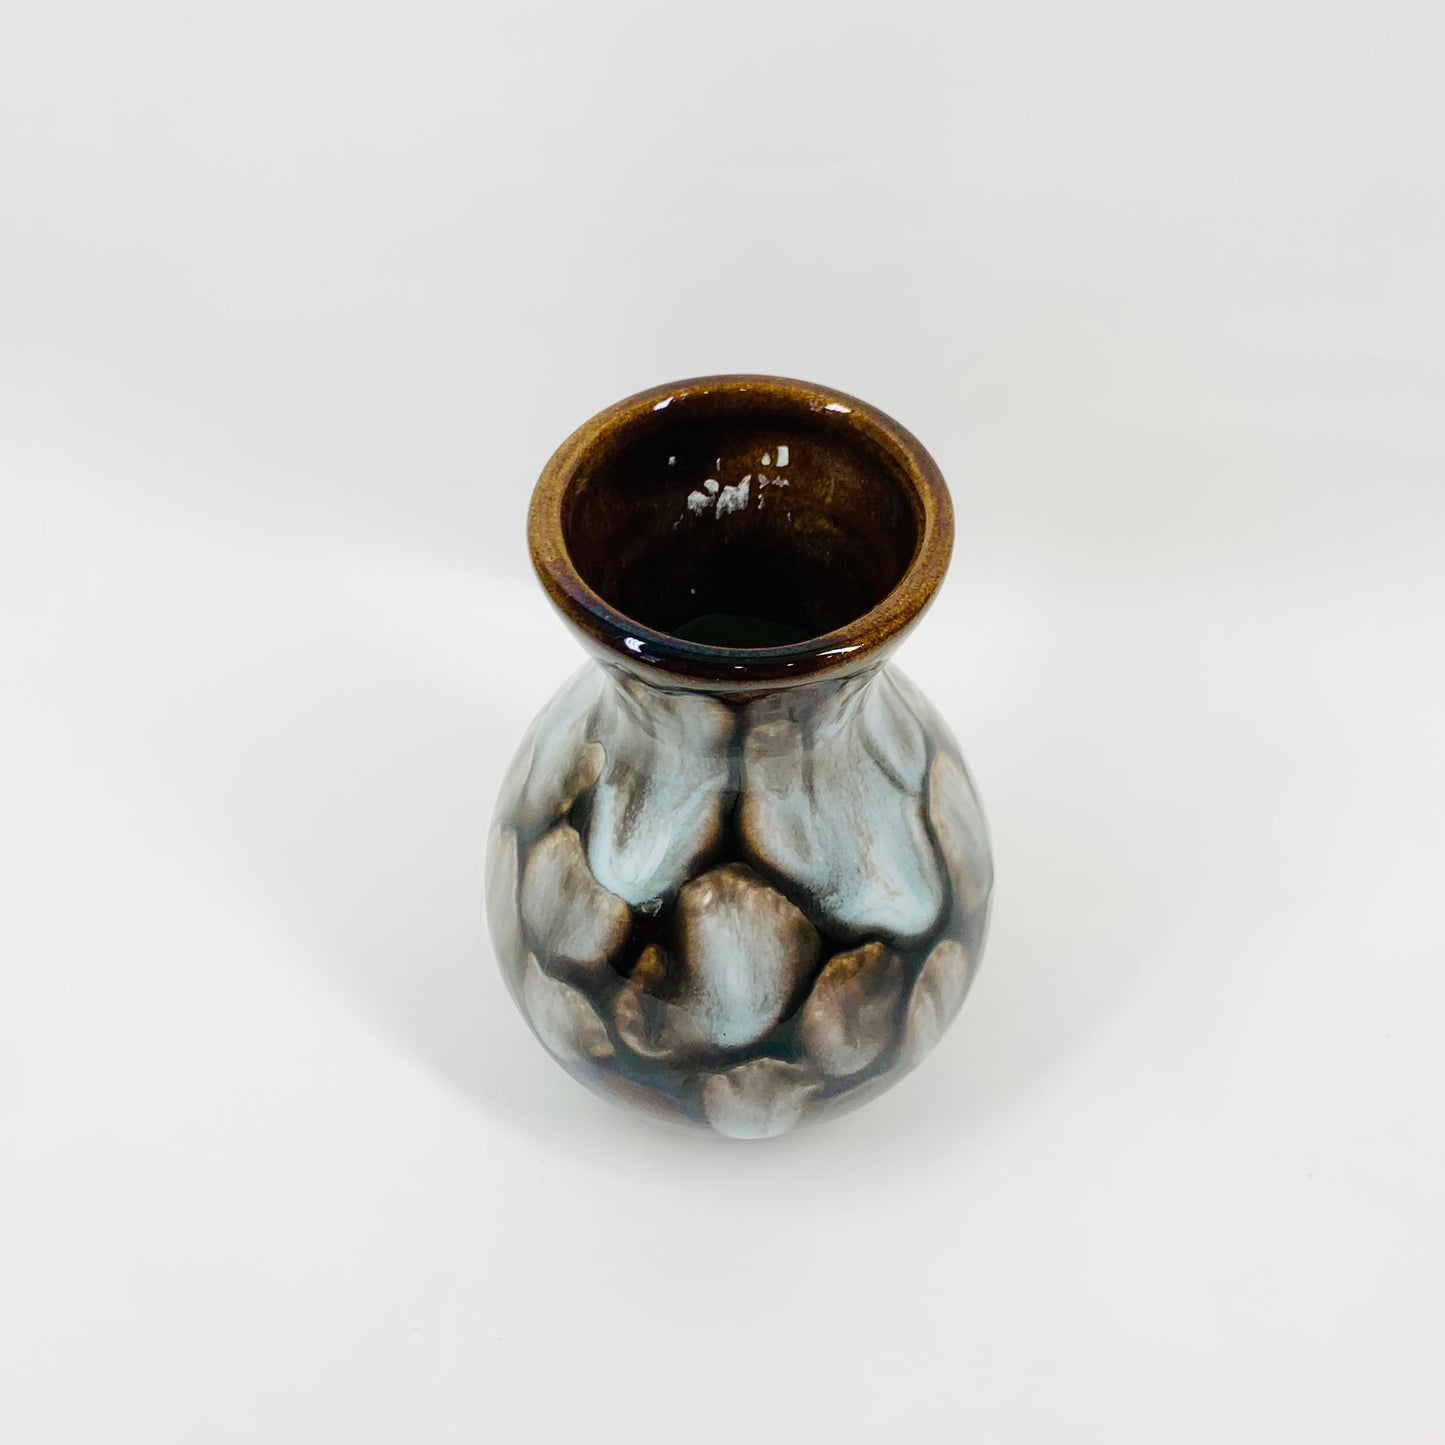 Retro Japanese pottery bottle vase with blue clouds